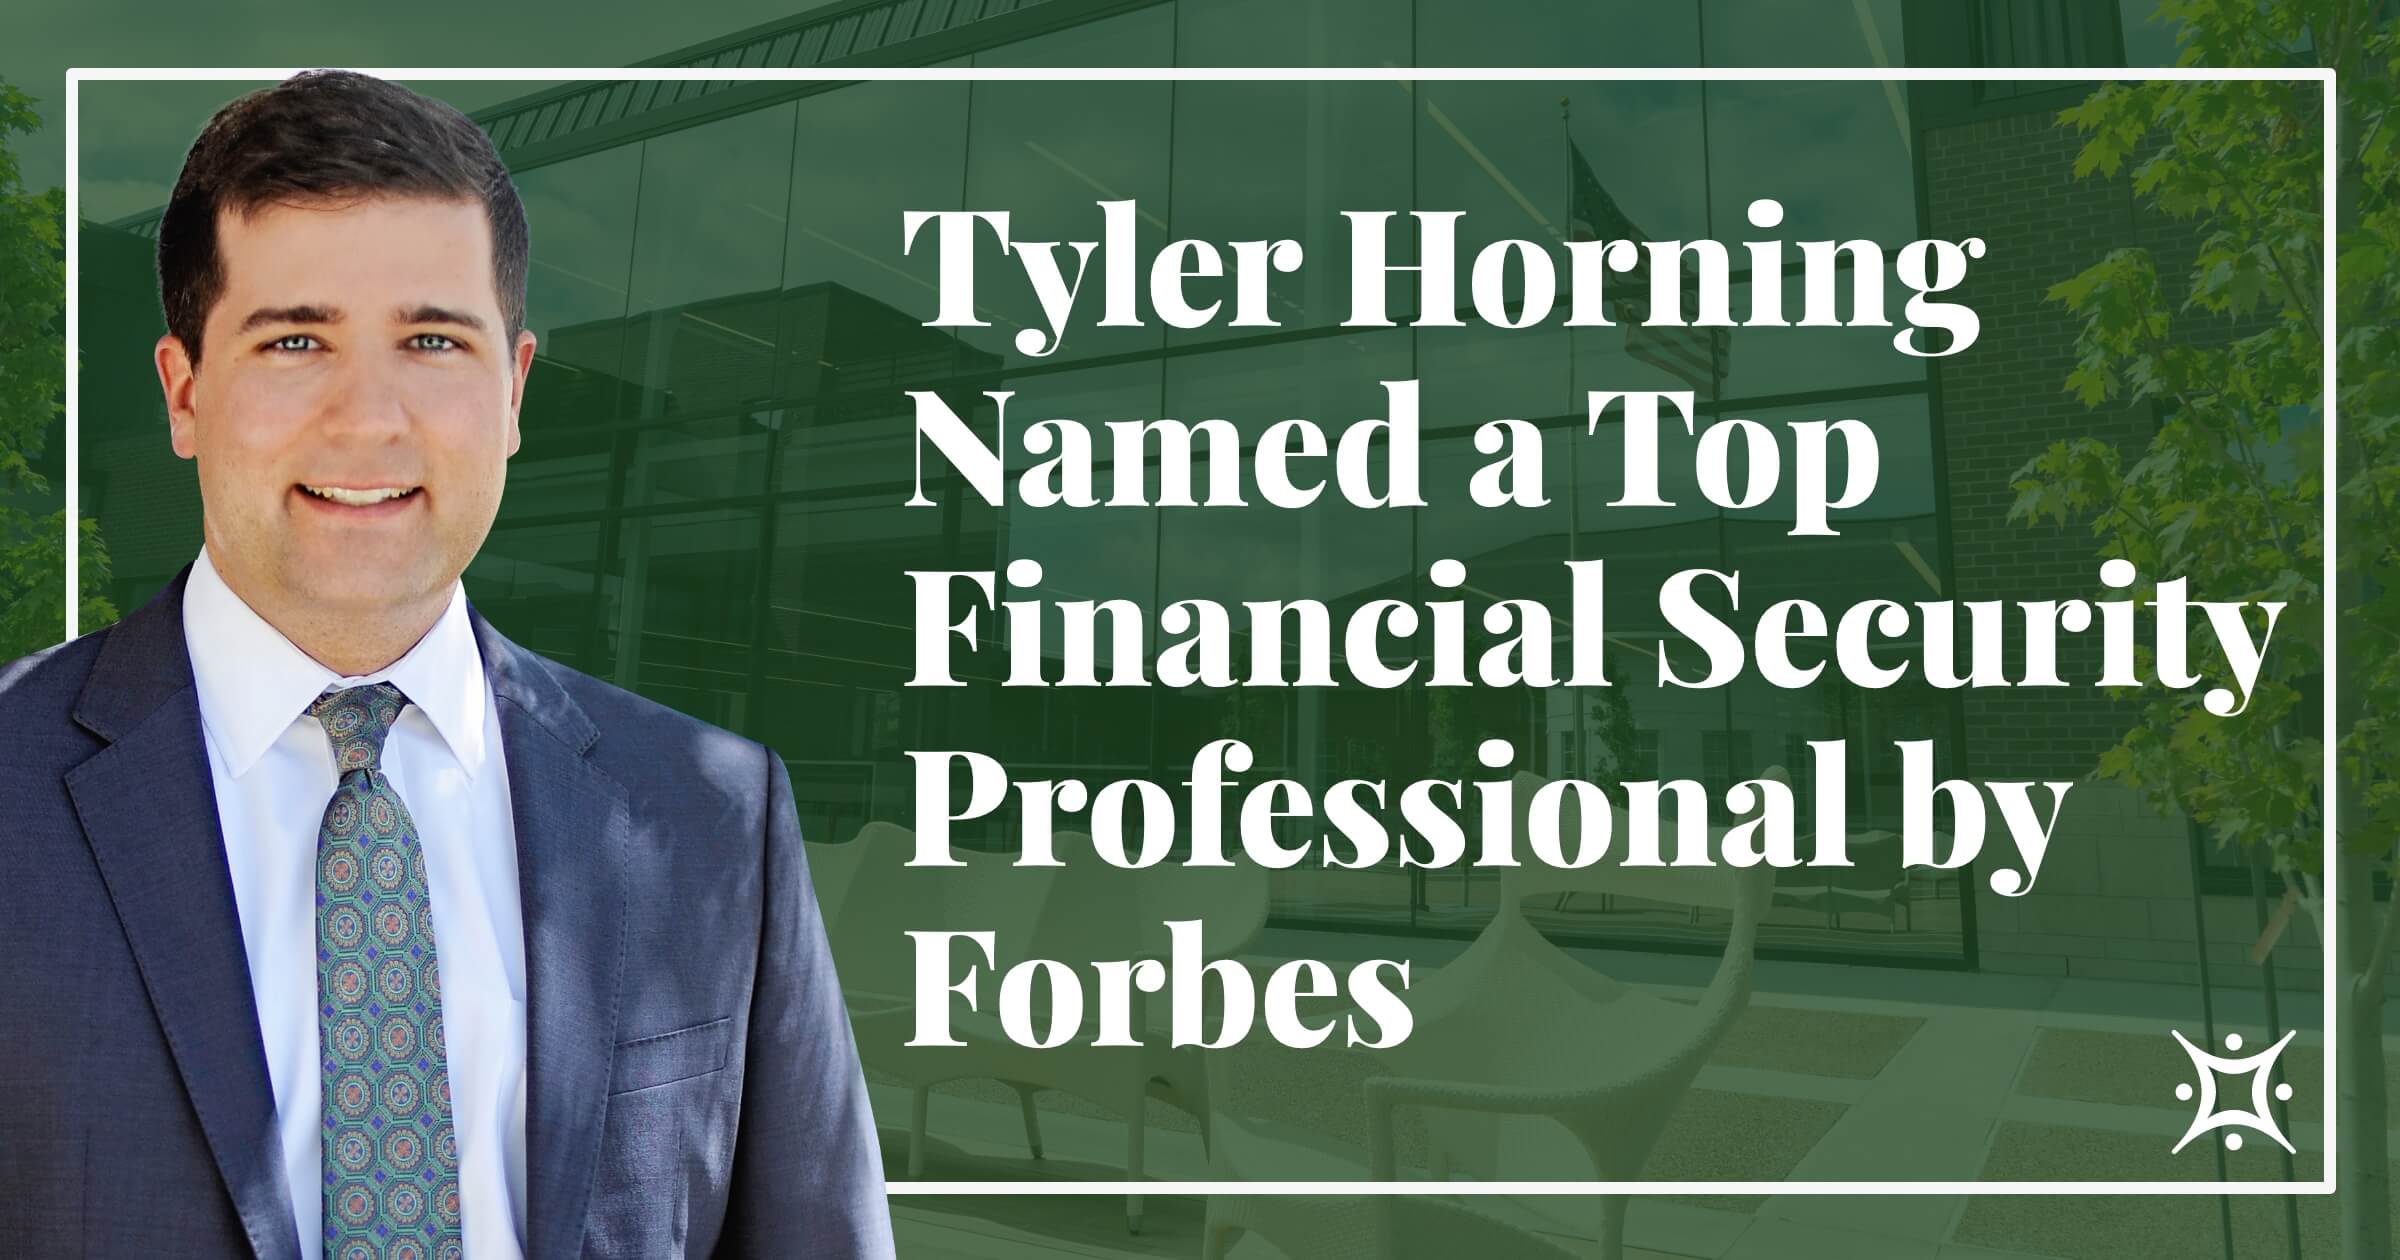 Tyler Horning Named a Top Financial Security Professional by Forbes